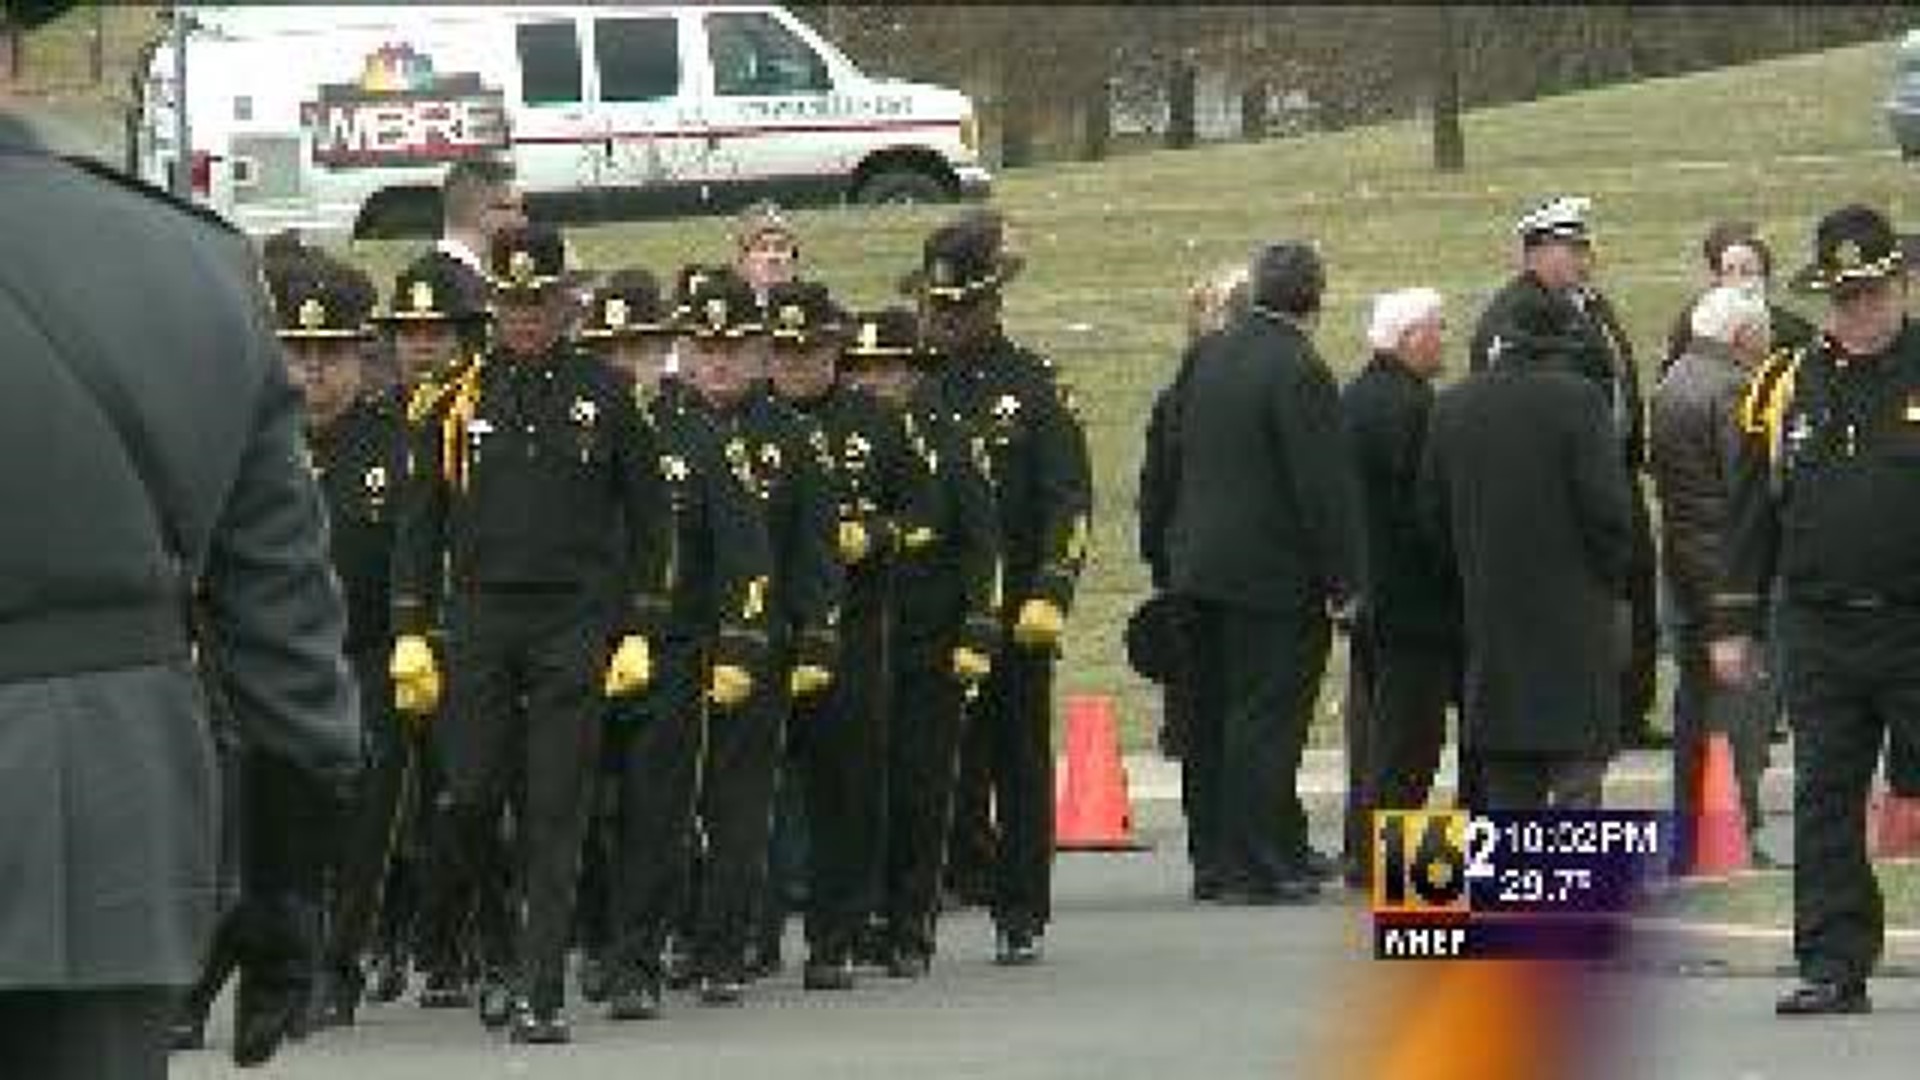 Hundreds Attend Services For Fallen Corrections Officer